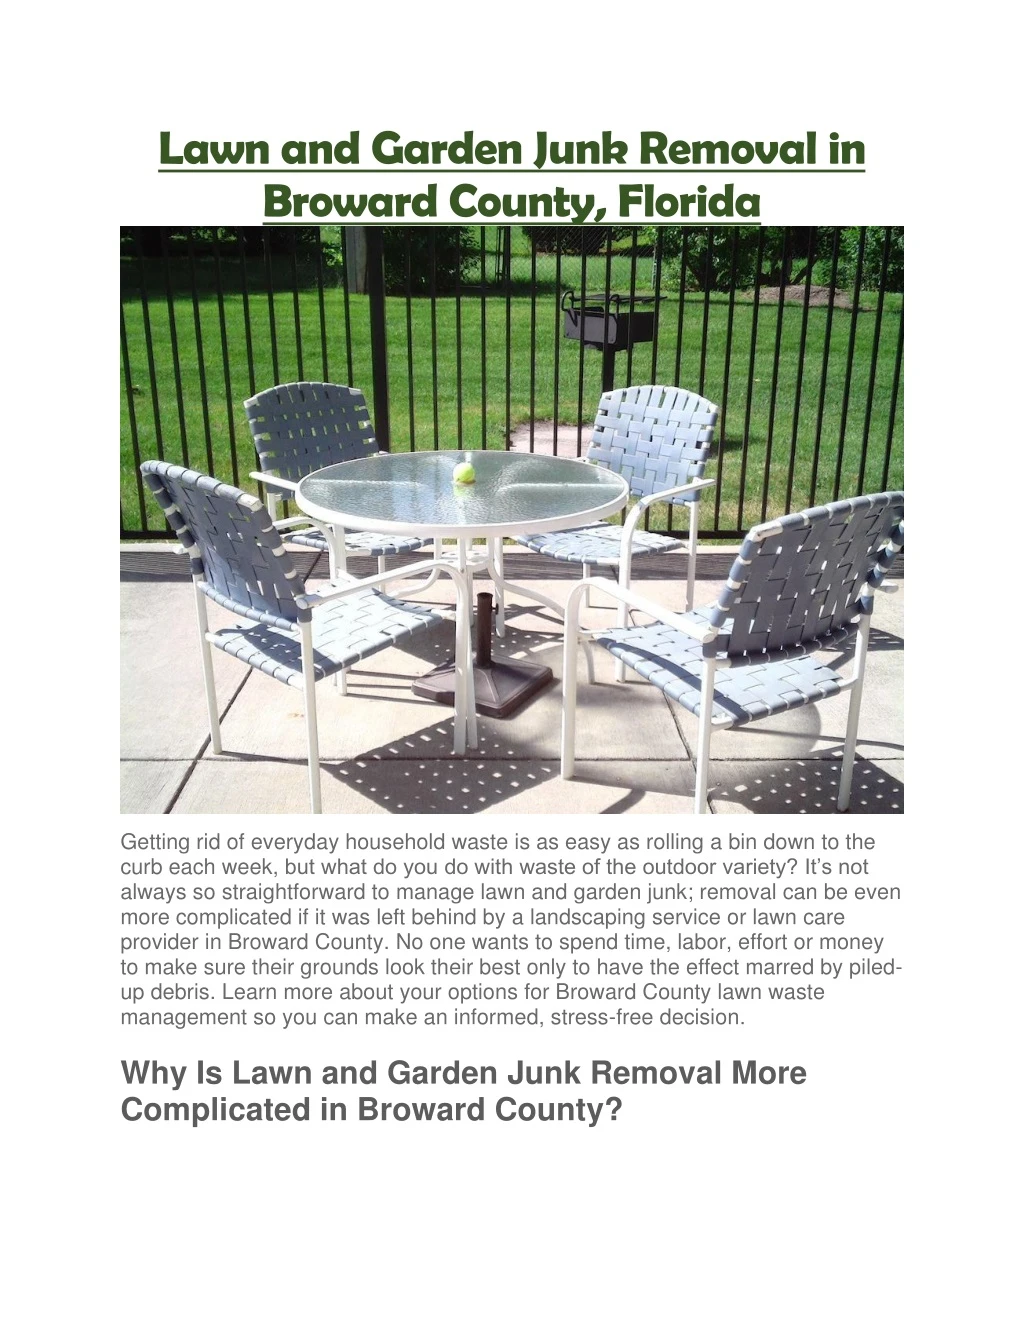 lawn and garden junk removal in broward county